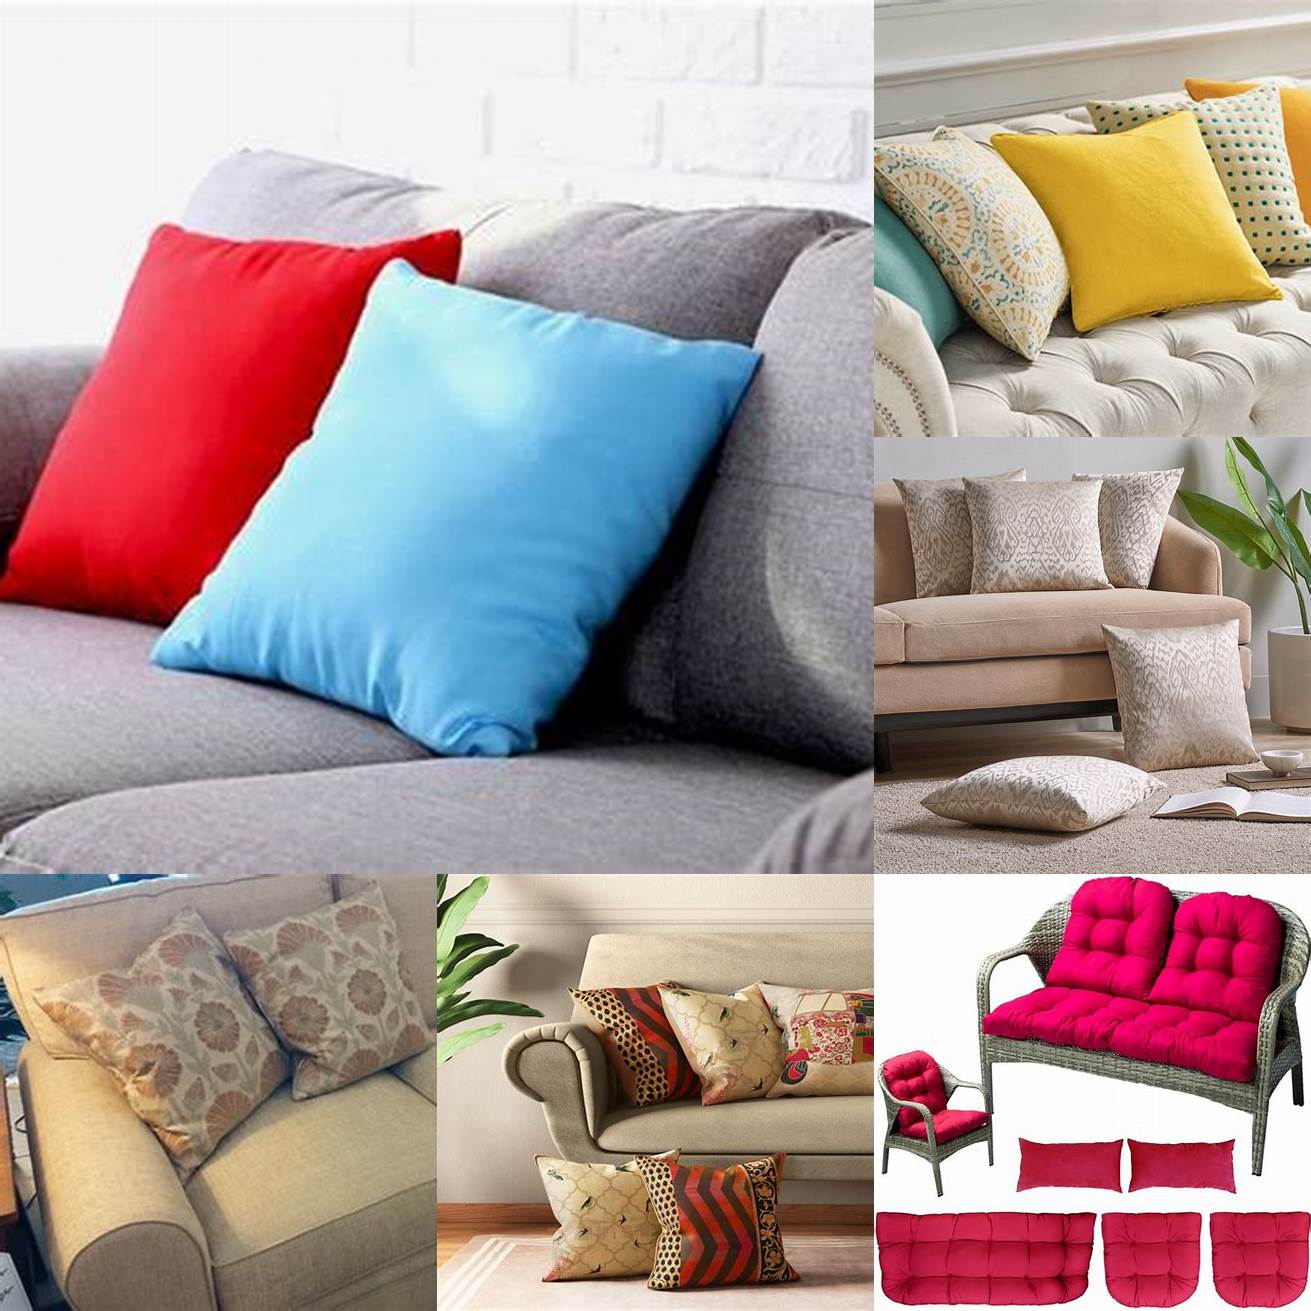 Choose the Right Cushions